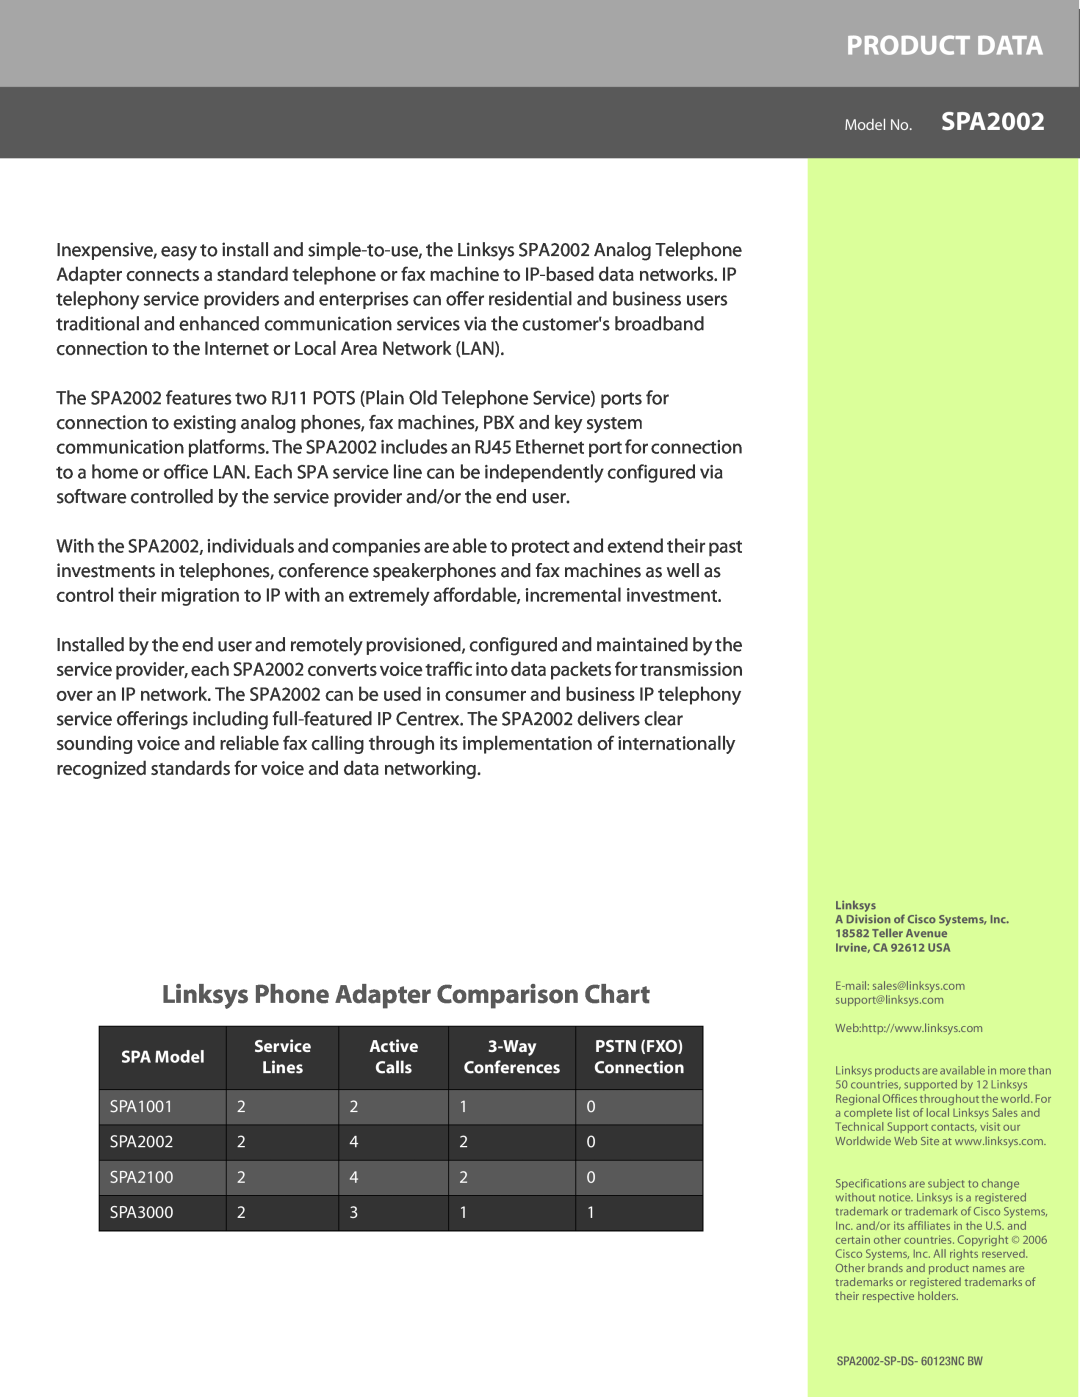 Linksys SPA2002 Linksys Phone Adapter Comparison Chart, Product Data, SPA Model, Service, Active, 3-Way, Pstn Fxo, Lines 